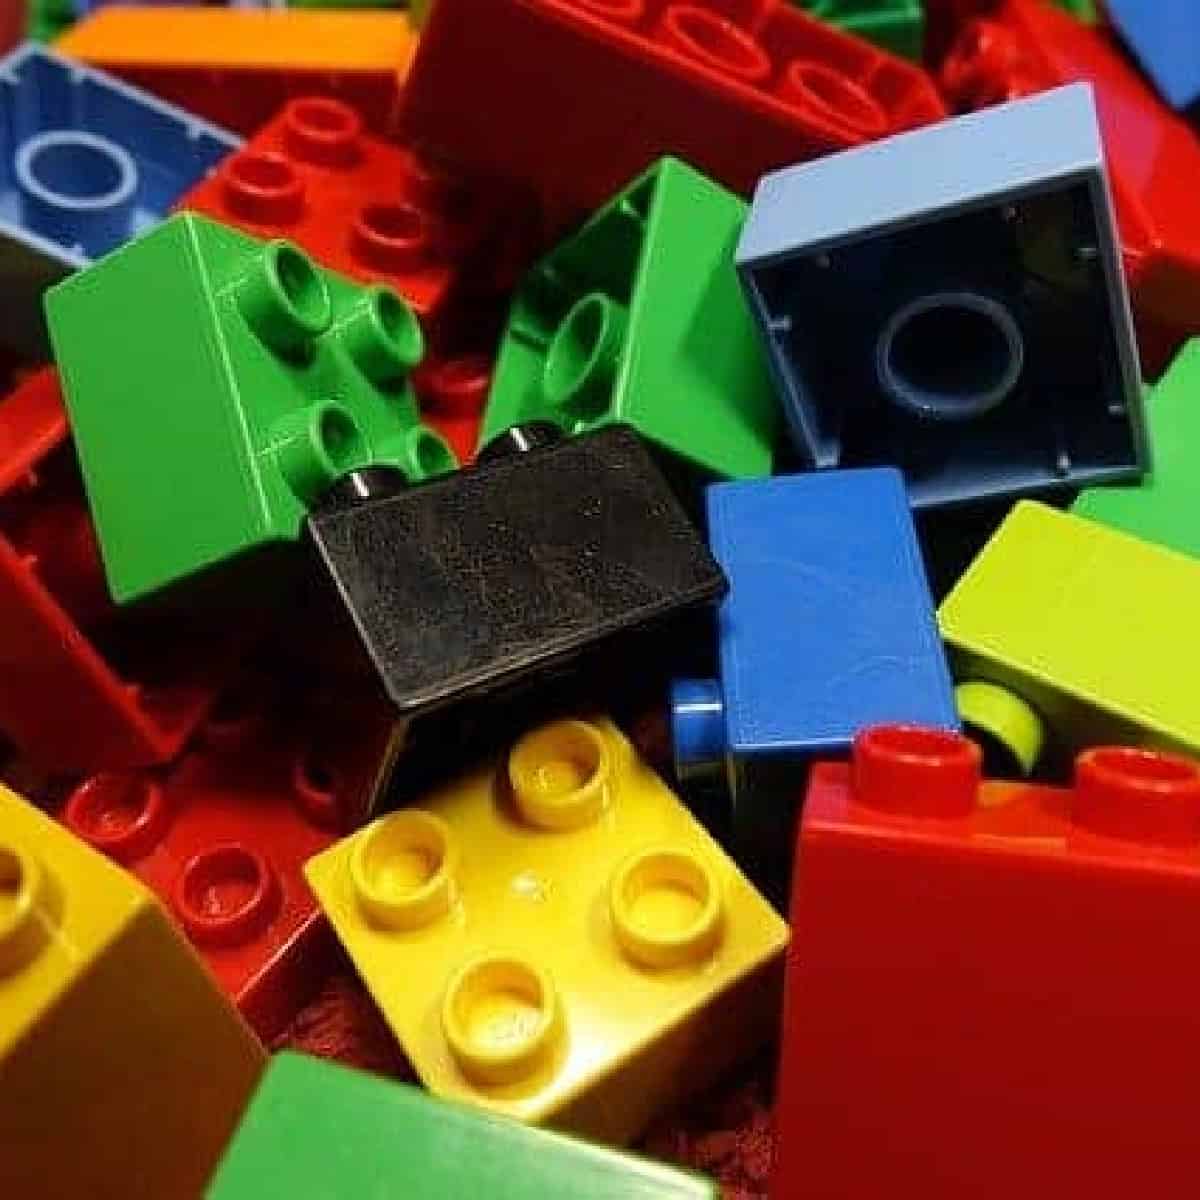 How To Clean & Sanitize Legos Without Chemicals